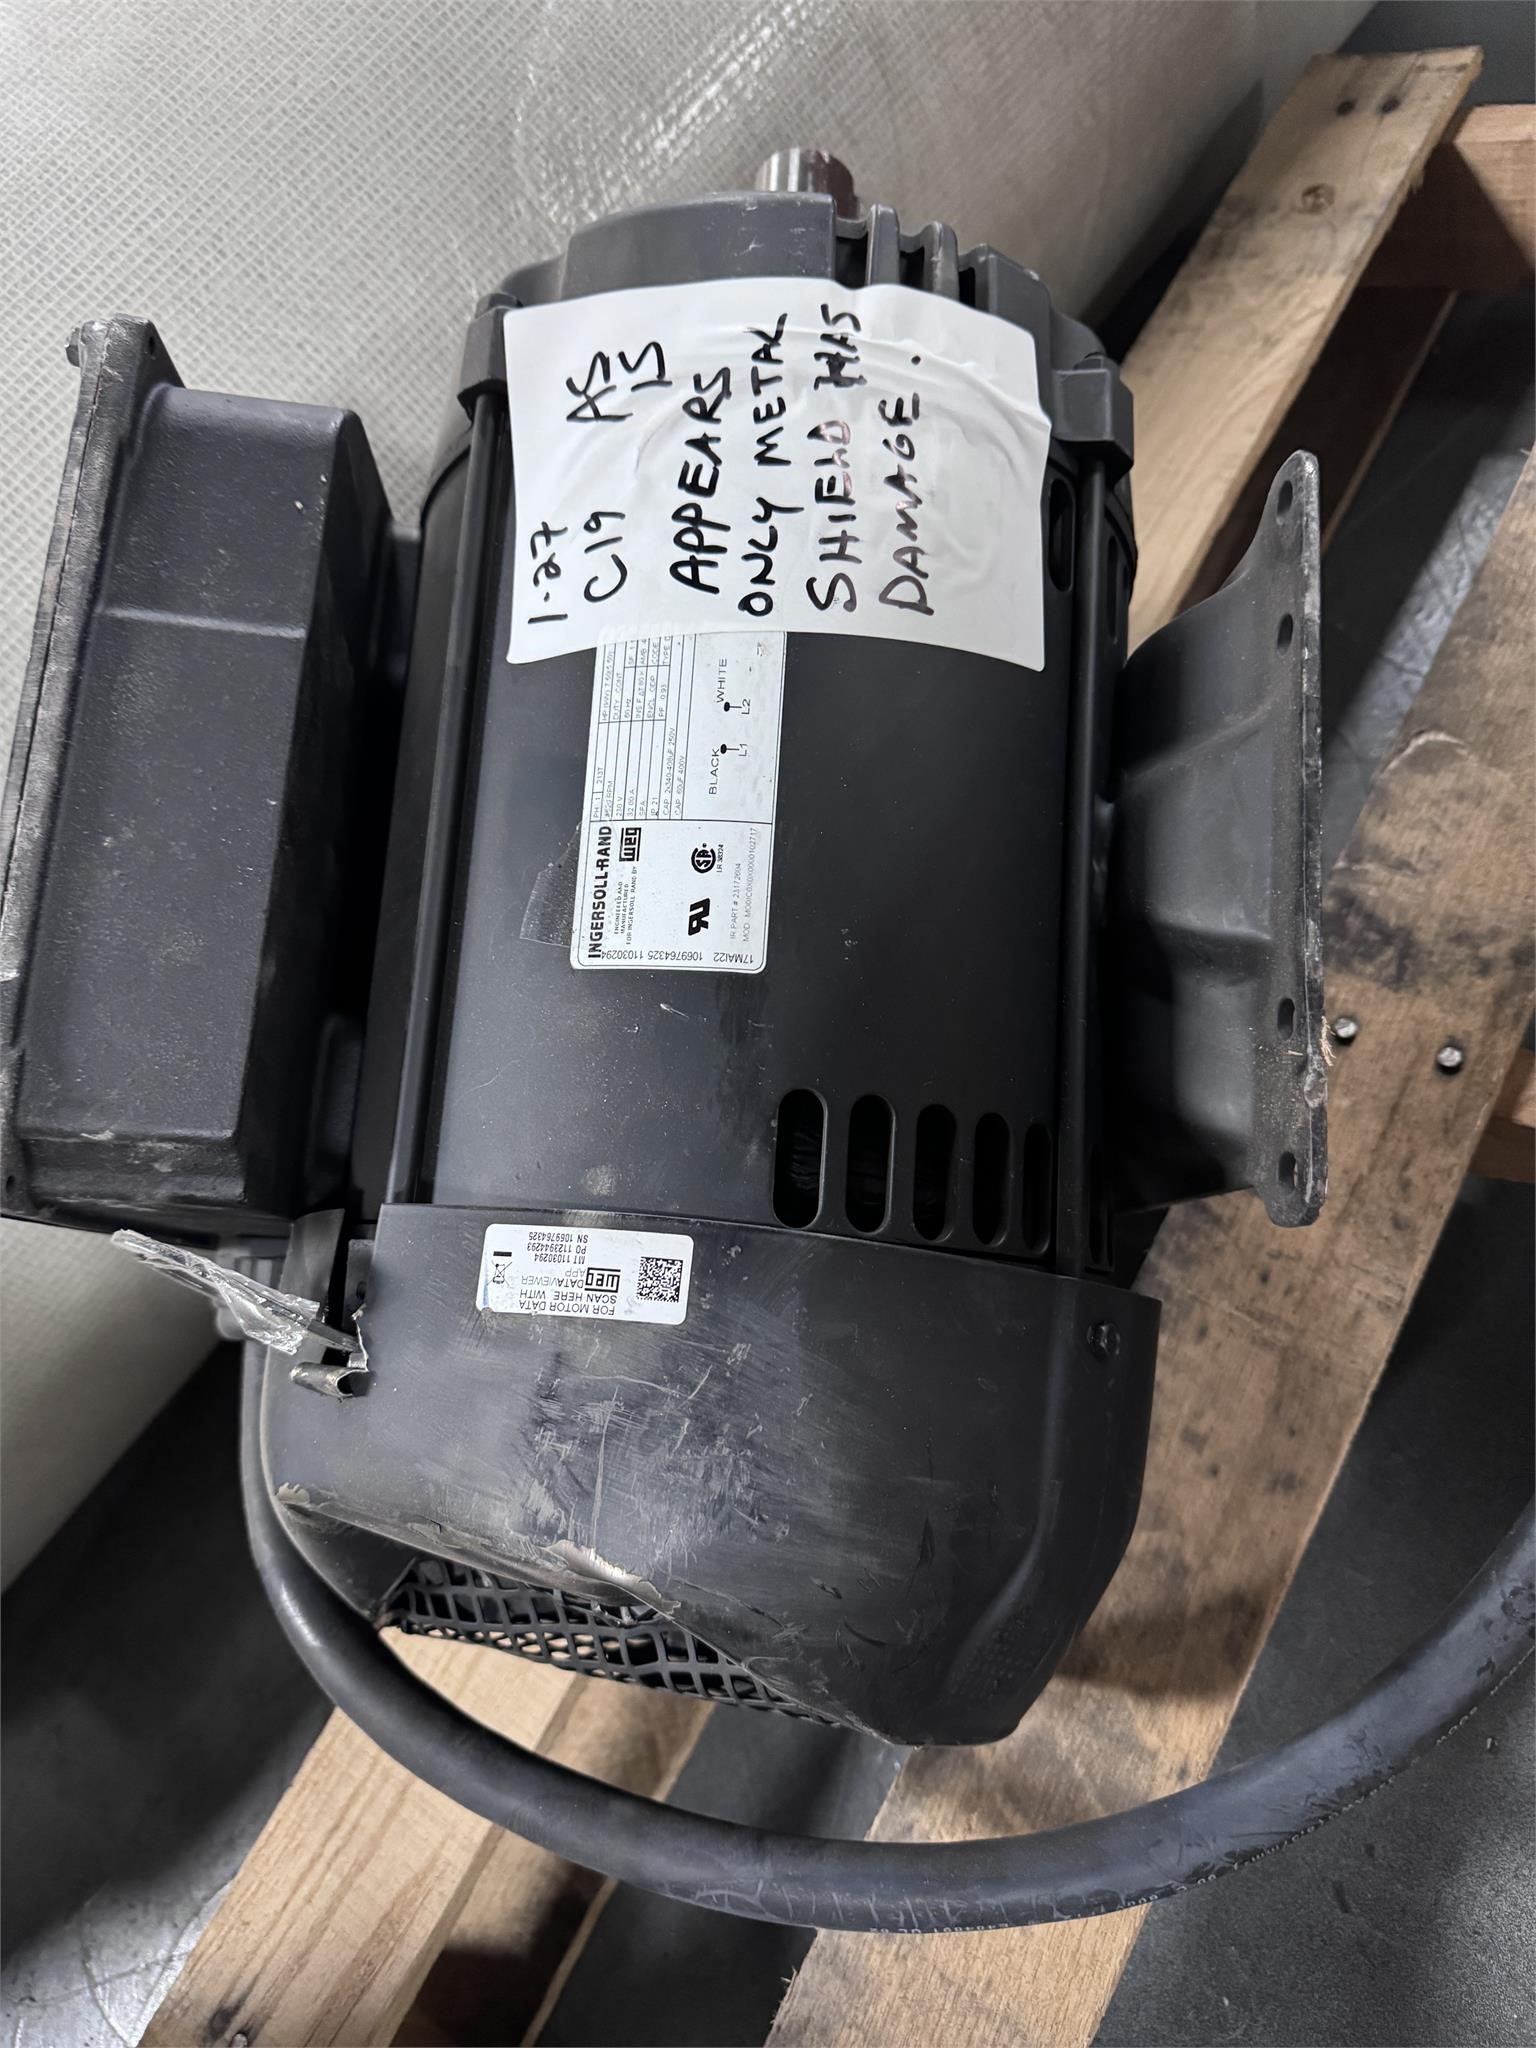 AS IS  $2,406 Motor, 1-Phase, Ingersoll Rand C19